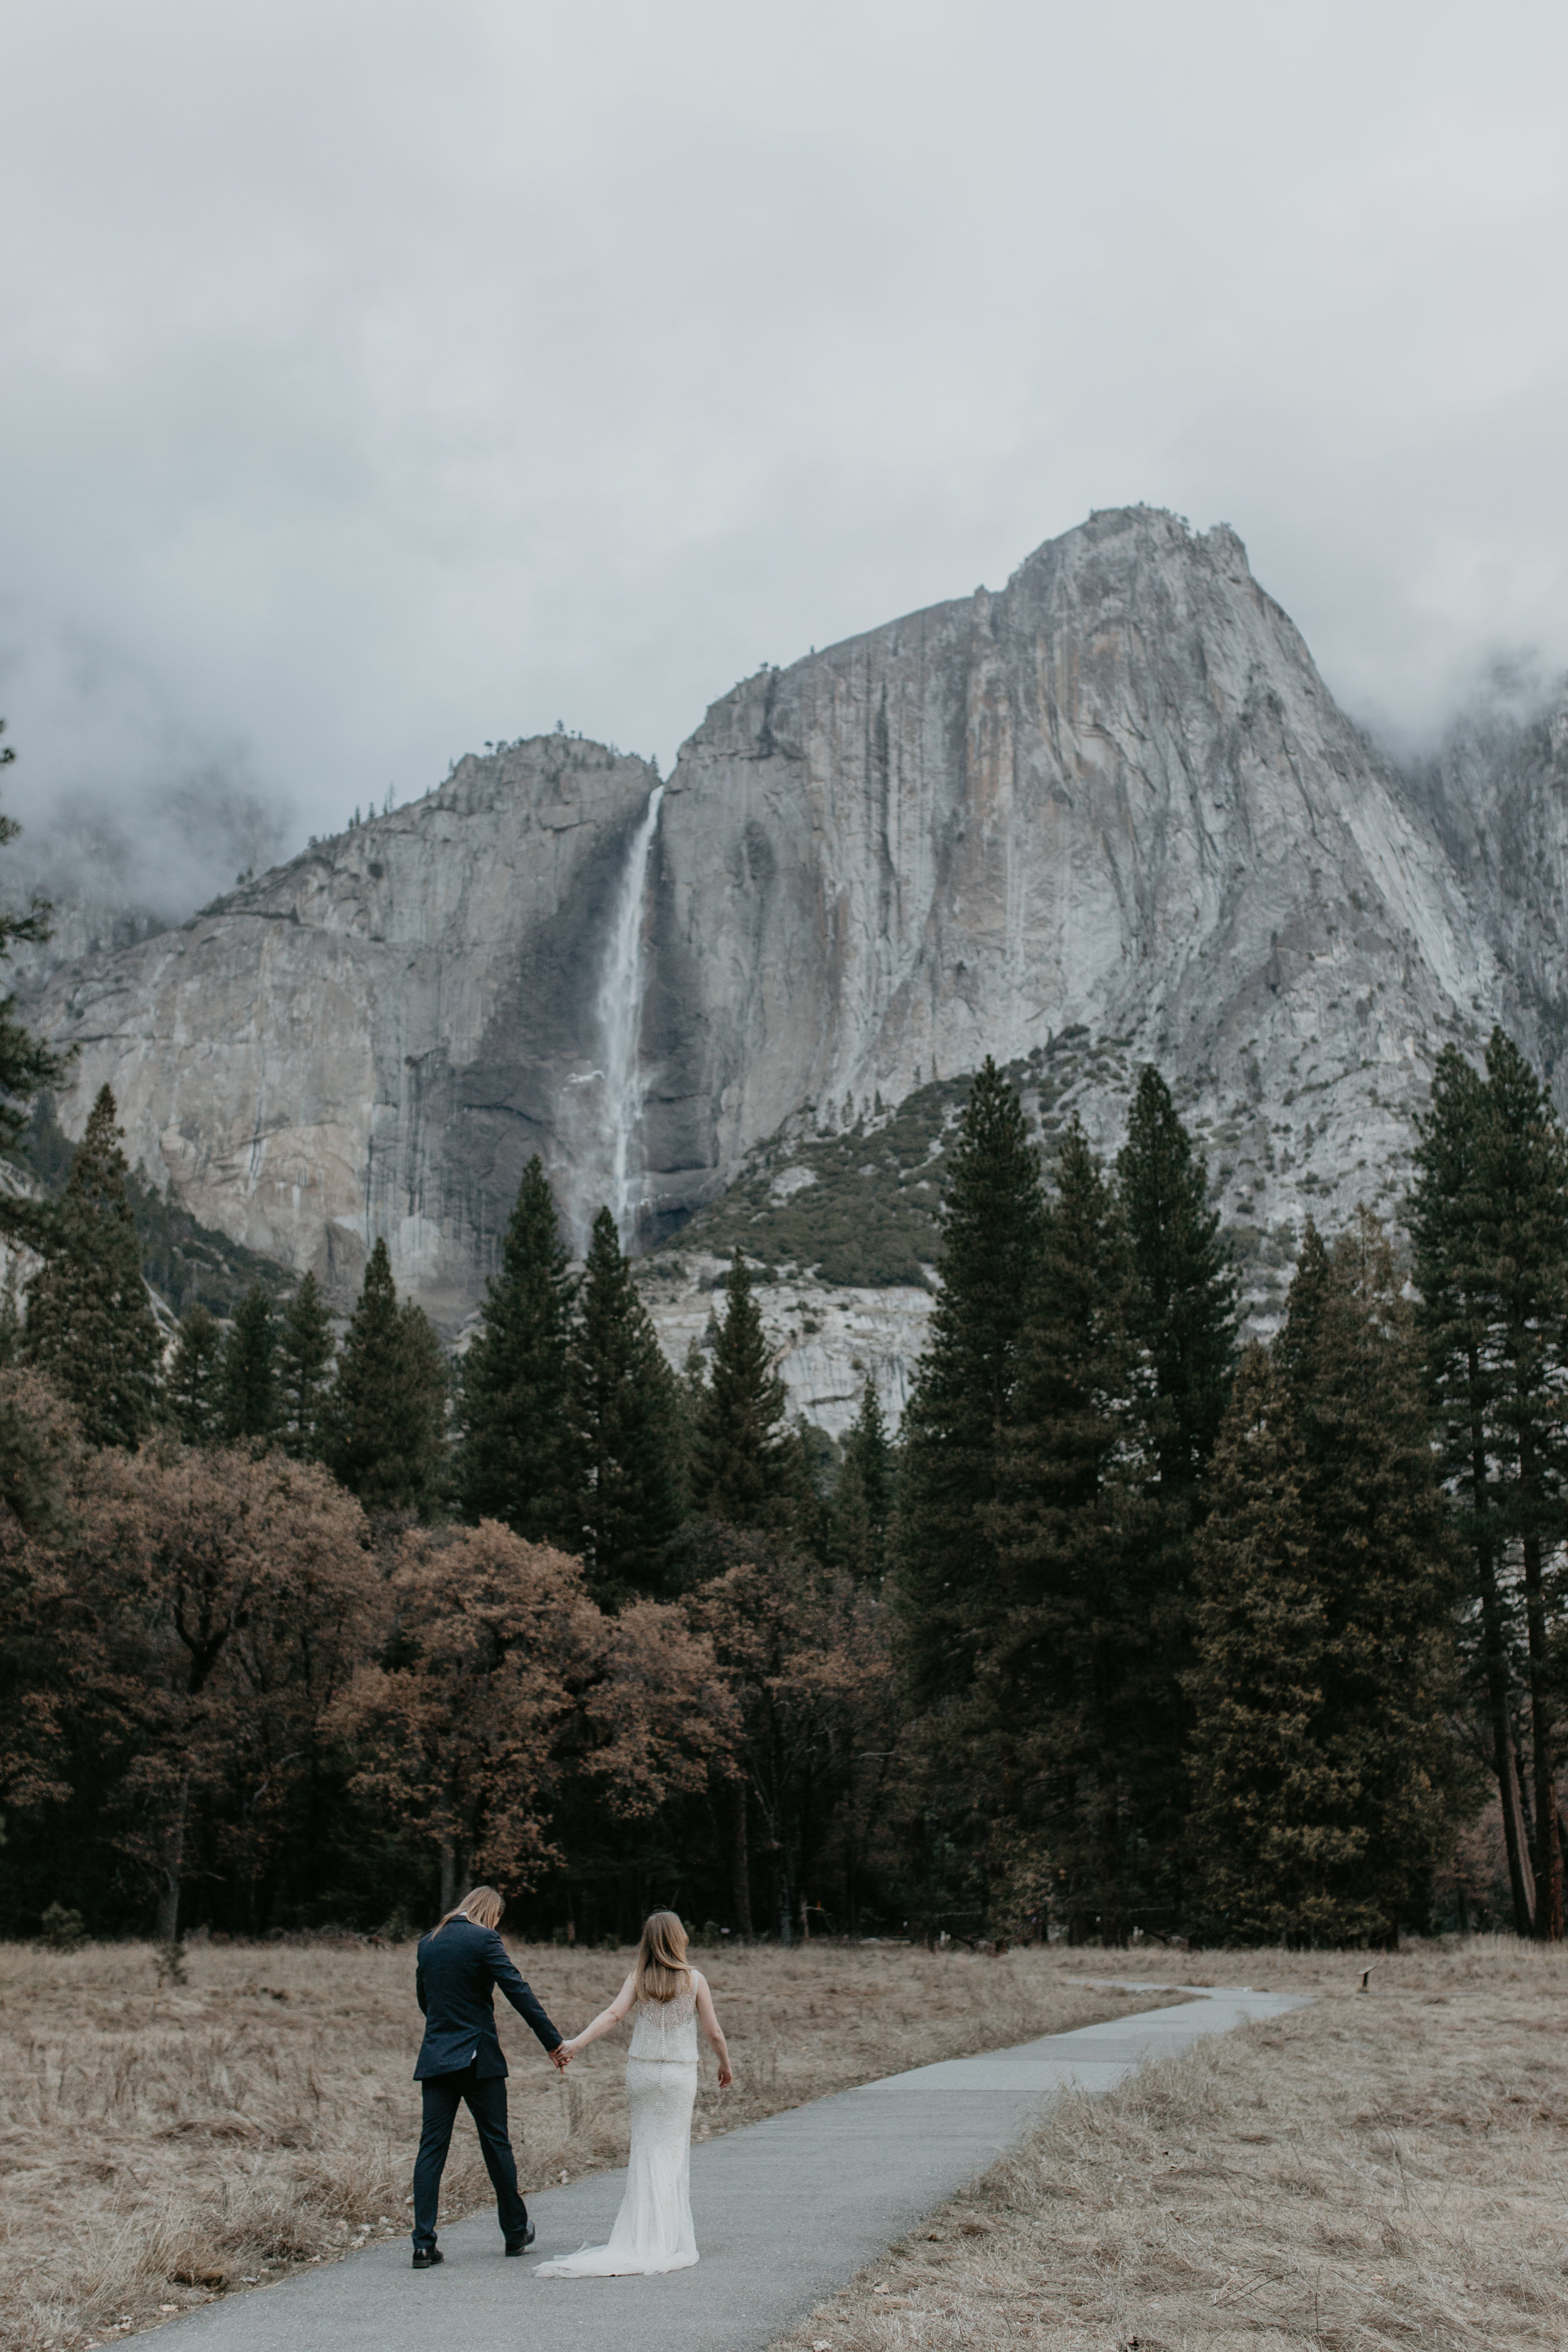 nicole-daacke-photography-yousemite-national-park-elopement-photographer-winter-cloud-moody-elope-inspiration-yosemite-valley-tunnel-view-winter-cloud-fog-weather-wedding-photos-21.jpg